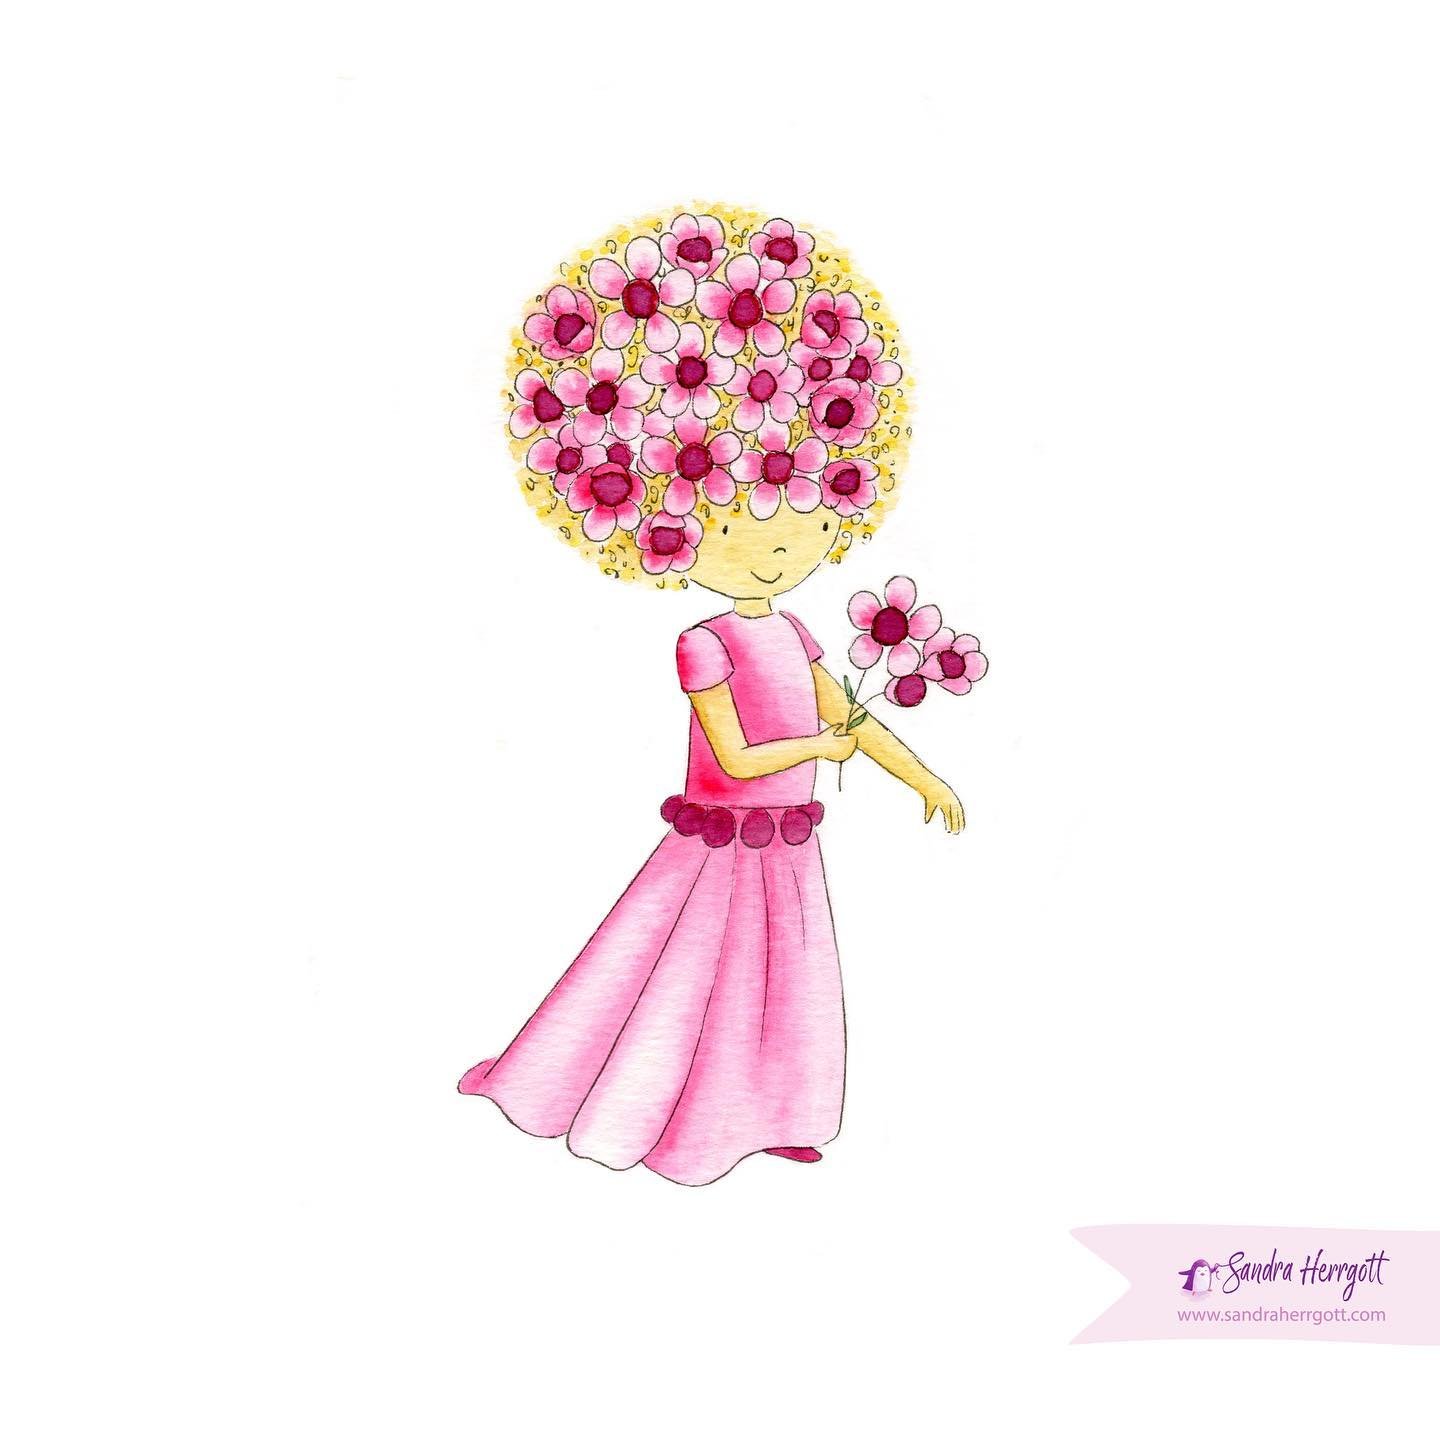 Sharing my wax flower girl I painted a few years ago for our #floralsandpraiseforhisglory challenge.
.
I am still creating a new piece, which I share with you next week.
.
Happy weekend!
Sandra 
.
.
.
.
.
.
.
.
.

#watercolorillustrations #watercolor